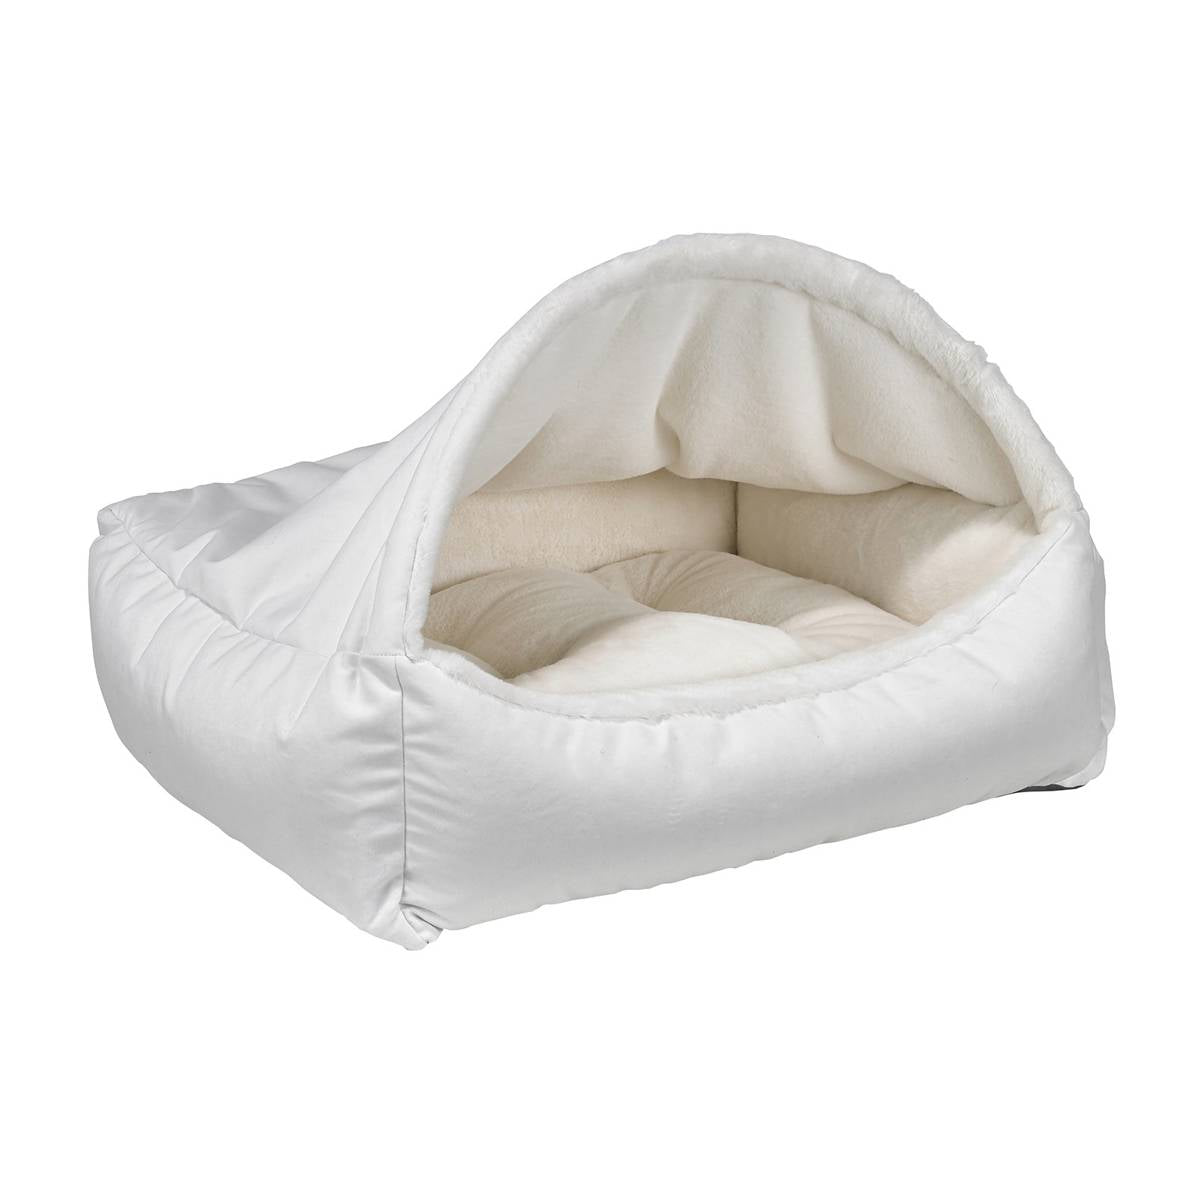 White Chewy Vuiton Bed, Dog Beds